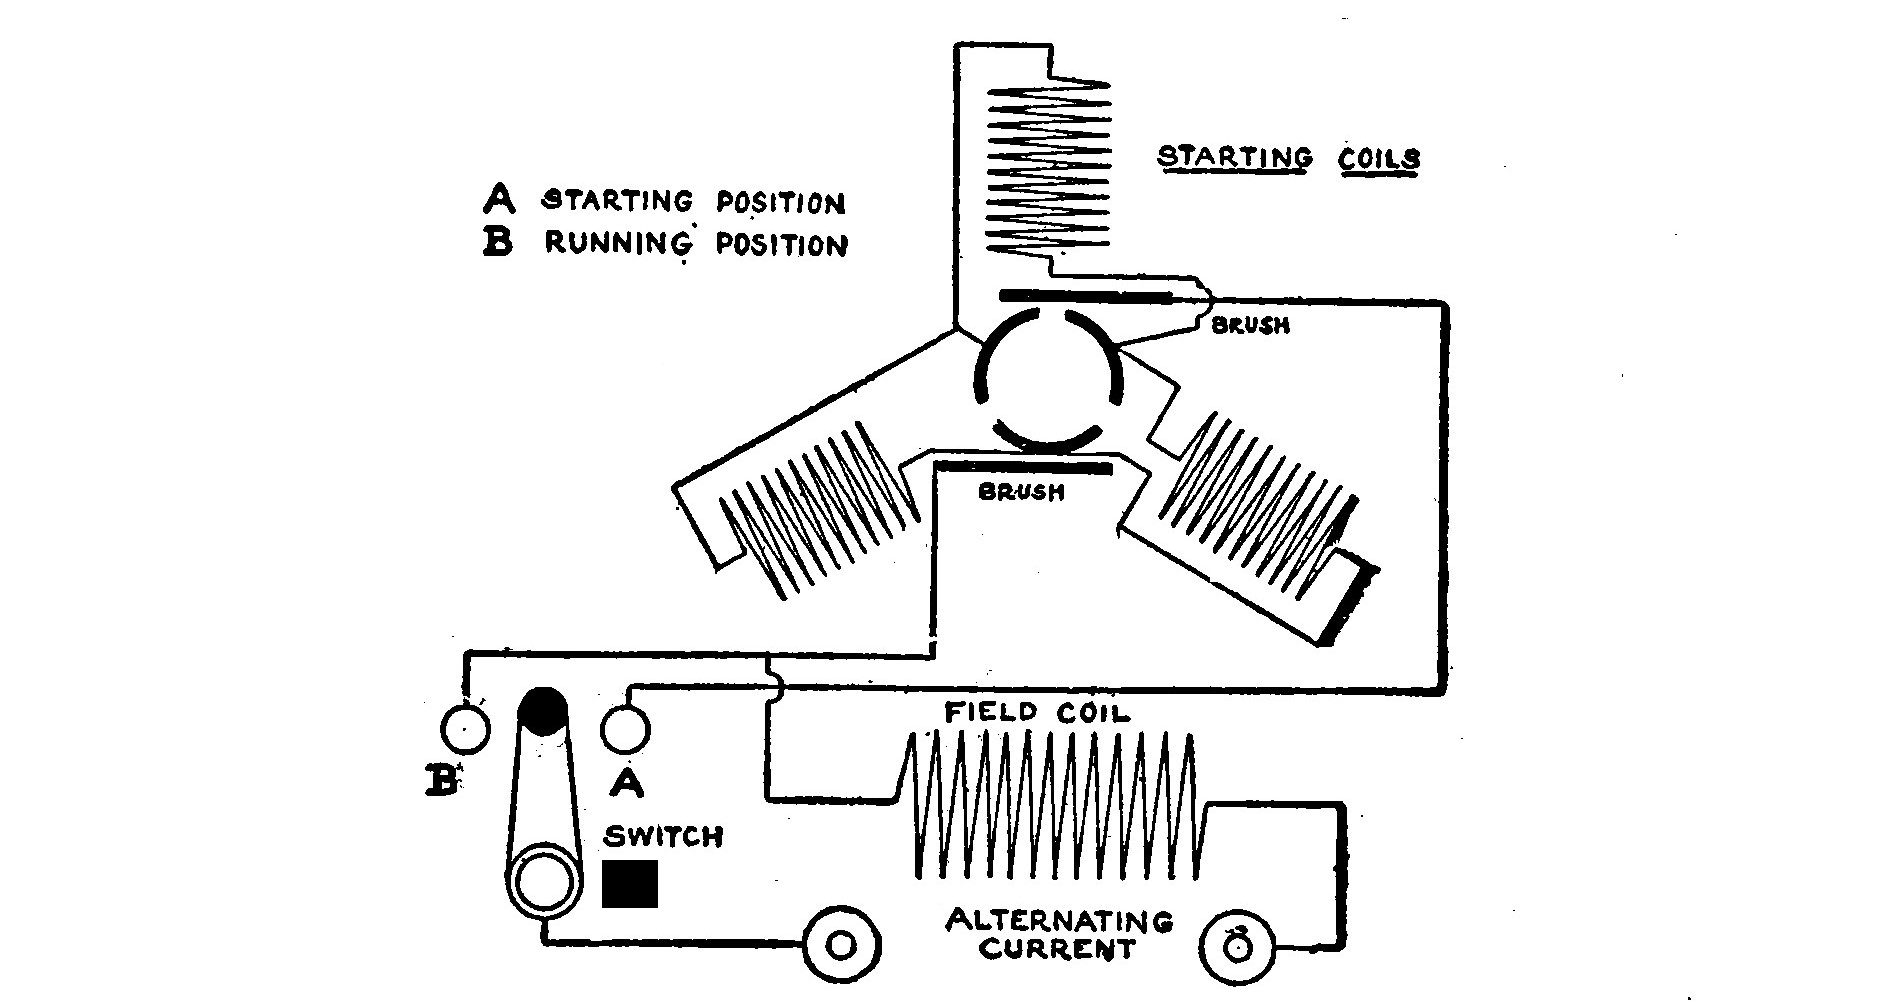 FIG. 49.—Showing how a Three-pole Motor may be provided with "Starting Coils" and connected to form an Experimental Induction Motor.